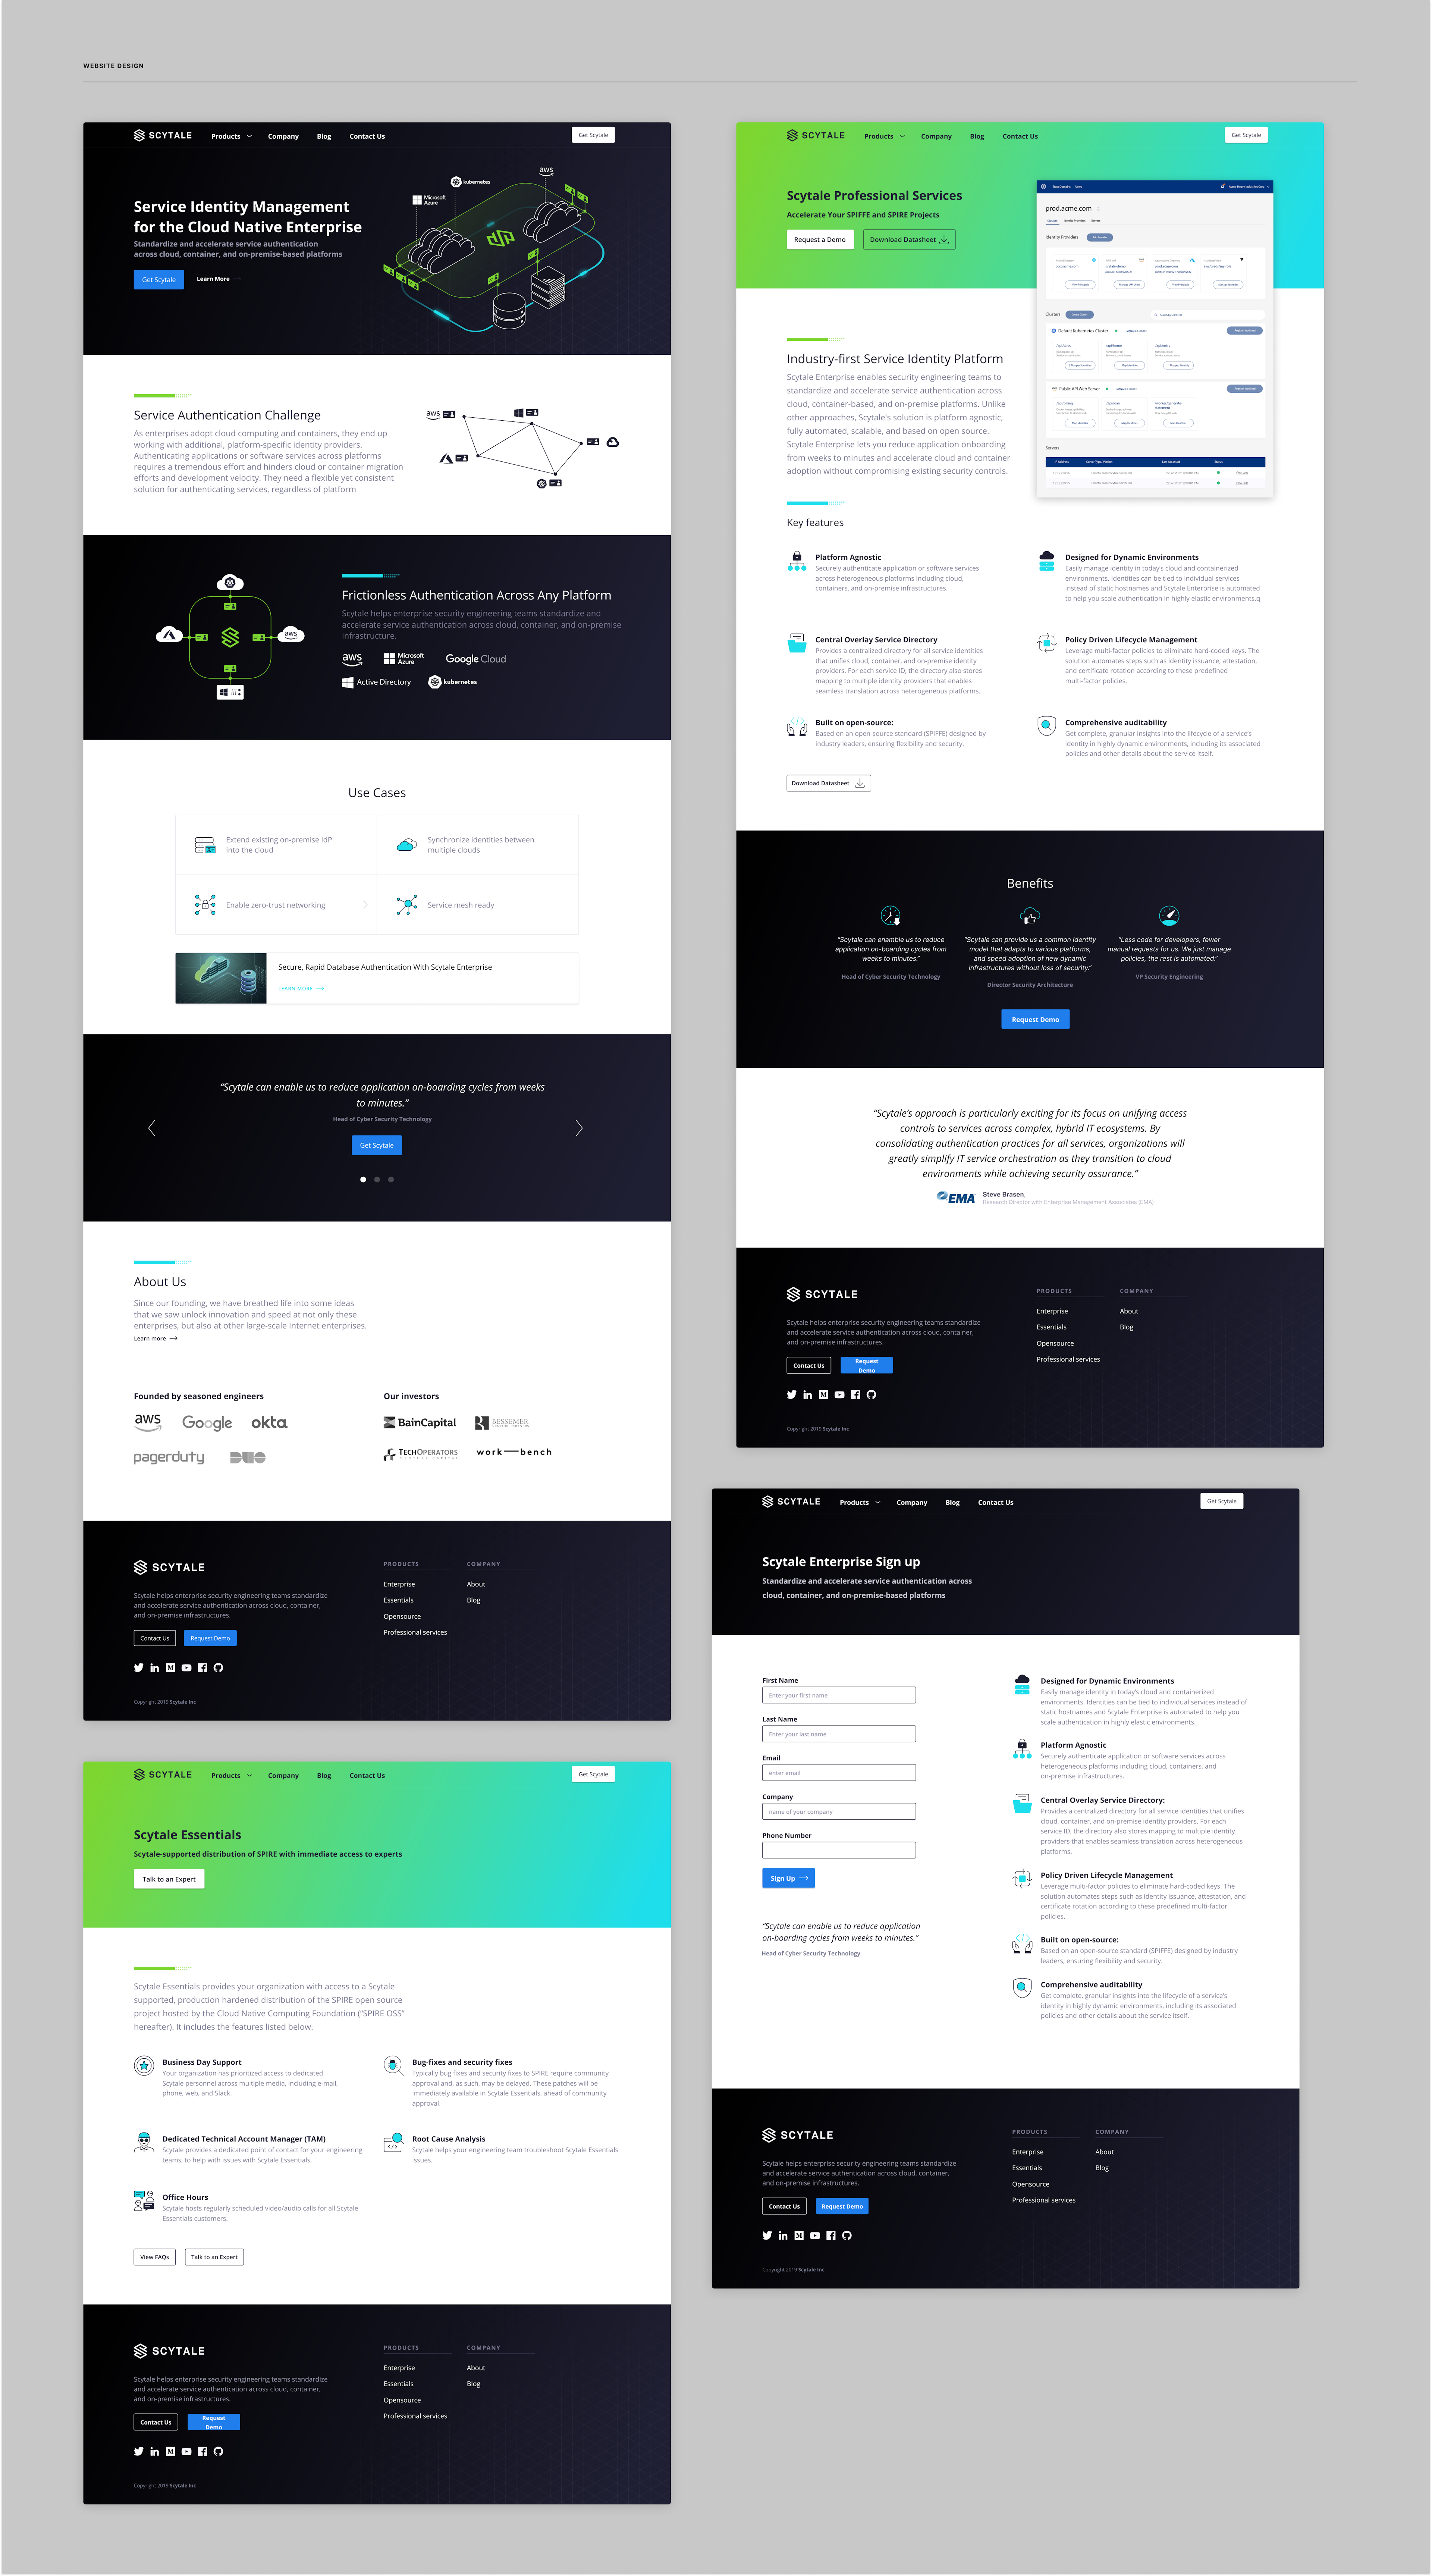 PREVIEW_1 Landing Page